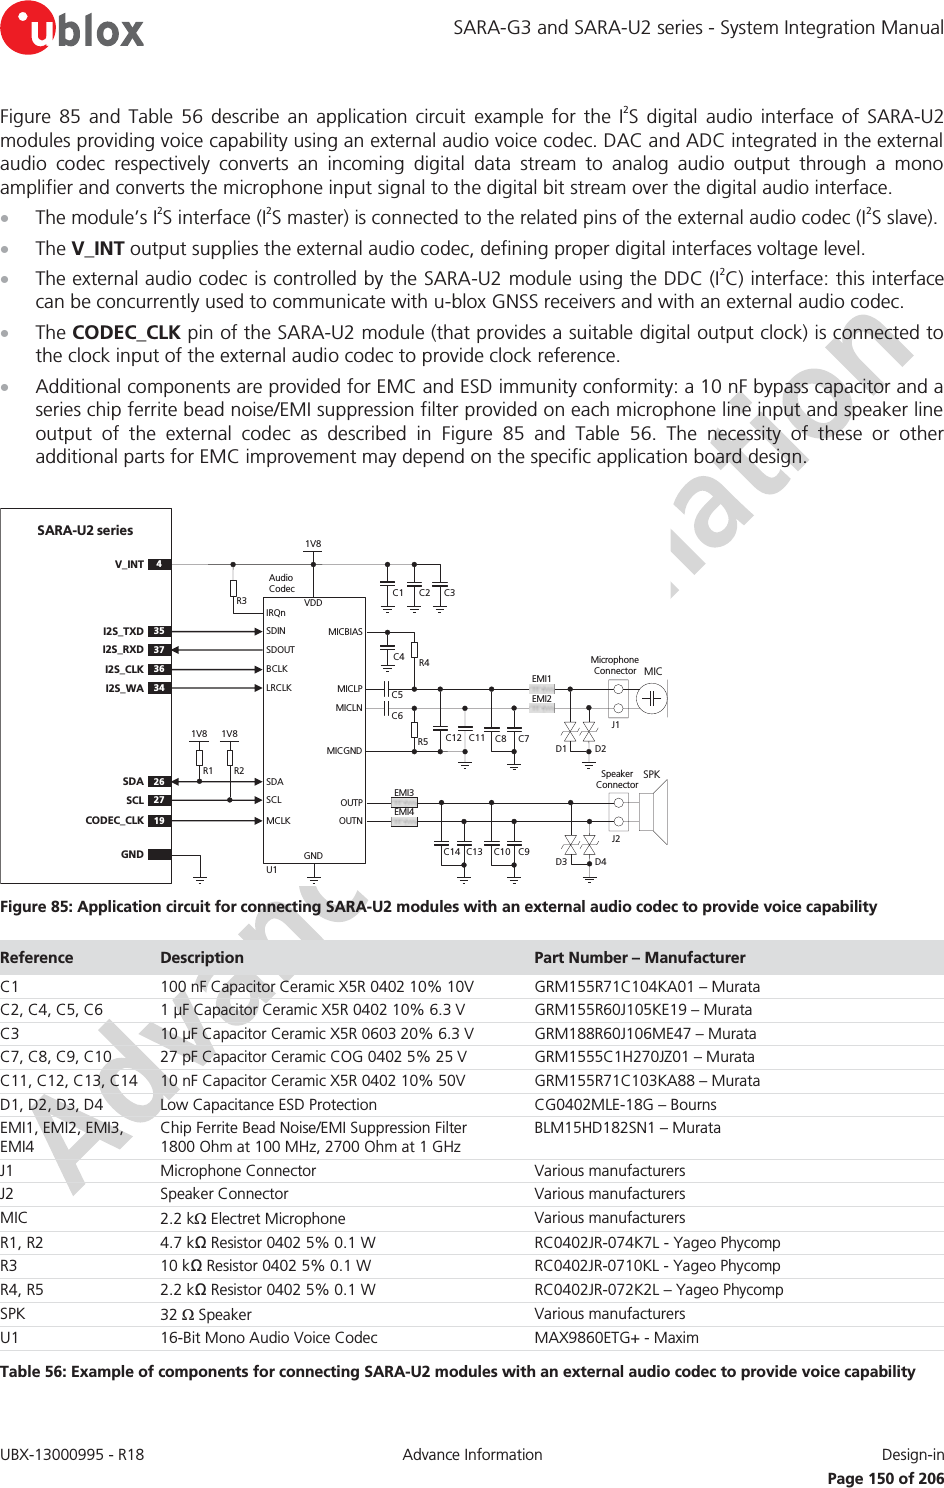 SARA-G3 and SARA-U2 series - System Integration Manual UBX-13000995 - R18  Advance Information  Design-in   Page 150 of 206 Figure 85 and Table 56 describe an application circuit example for the I2S digital audio interface of SARA-U2 modules providing voice capability using an external audio voice codec. DAC and ADC integrated in the external audio codec respectively converts an incoming digital data stream to analog audio output through a mono amplifier and converts the microphone input signal to the digital bit stream over the digital audio interface. x The module’s I2S interface (I2S master) is connected to the related pins of the external audio codec (I2S slave). x The V_INT output supplies the external audio codec, defining proper digital interfaces voltage level. x The external audio codec is controlled by the SARA-U2 module using the DDC (I2C) interface: this interface can be concurrently used to communicate with u-blox GNSS receivers and with an external audio codec. x The CODEC_CLK pin of the SARA-U2 module (that provides a suitable digital output clock) is connected to the clock input of the external audio codec to provide clock reference. x Additional components are provided for EMC and ESD immunity conformity: a 10 nF bypass capacitor and a series chip ferrite bead noise/EMI suppression filter provided on each microphone line input and speaker line output of the external codec as described in Figure 85 and Table 56. The necessity of these or other additional parts for EMC improvement may depend on the specific application board design.  R2R1GNDU1SARA-U2 seriesAudio   Codec26SDA27SCLSDASCL19CODEC_CLKMCLKGNDR3C3C2C14V_INTVDD1V8MICBIASC4 R4C5C6EMI1MICLNMICLPMicrophone ConnectorEMI2MICC12 C11J1MICGNDR5 C8 C7SPKSpeaker ConnectorOUTPOUTNJ2C10 C9C14 C13EMI3EMI4IRQnBCLKLRCLKSDINSDOUT36I2S_CLK34I2S_WA35I2S_TXD37I2S_RXD1V81V8D3D1D4D2 Figure 85: Application circuit for connecting SARA-U2 modules with an external audio codec to provide voice capability Reference  Description  Part Number – Manufacturer C1 100 nF Capacitor Ceramic X5R 0402 10% 10V GRM155R71C104KA01 – Murata C2, C4, C5, C6 1 μF Capacitor Ceramic X5R 0402 10% 6.3 V GRM155R60J105KE19 – Murata C3 10 μF Capacitor Ceramic X5R 0603 20% 6.3 V GRM188R60J106ME47 – Murata C7, C8, C9, C10 27 pF Capacitor Ceramic COG 0402 5% 25 V  GRM1555C1H270JZ01 – Murata C11, C12, C13, C14 10 nF Capacitor Ceramic X5R 0402 10% 50V GRM155R71C103KA88 – Murata D1, D2, D3, D4 Low Capacitance ESD Protection CG0402MLE-18G – Bourns EMI1, EMI2, EMI3, EMI4 Chip Ferrite Bead Noise/EMI Suppression Filter 1800 Ohm at 100 MHz, 2700 Ohm at 1 GHz BLM15HD182SN1 – Murata J1 Microphone Connector Various manufacturers  J2 Speaker Connector Various manufacturers  MIC 2.2 k: Electret Microphone Various manufacturers R1, R2  4.7 kΩ Resistor 0402 5% 0.1 W  RC0402JR-074K7L - Yageo Phycomp R3 10 kΩ Resistor 0402 5% 0.1 W  RC0402JR-0710KL - Yageo Phycomp R4, R5 2.2 kΩ Resistor 0402 5% 0.1 W  RC0402JR-072K2L – Yageo Phycomp SPK 32 : Speaker Various manufacturers  U1 16-Bit Mono Audio Voice Codec MAX9860ETG+ - Maxim Table 56: Example of components for connecting SARA-U2 modules with an external audio codec to provide voice capability 